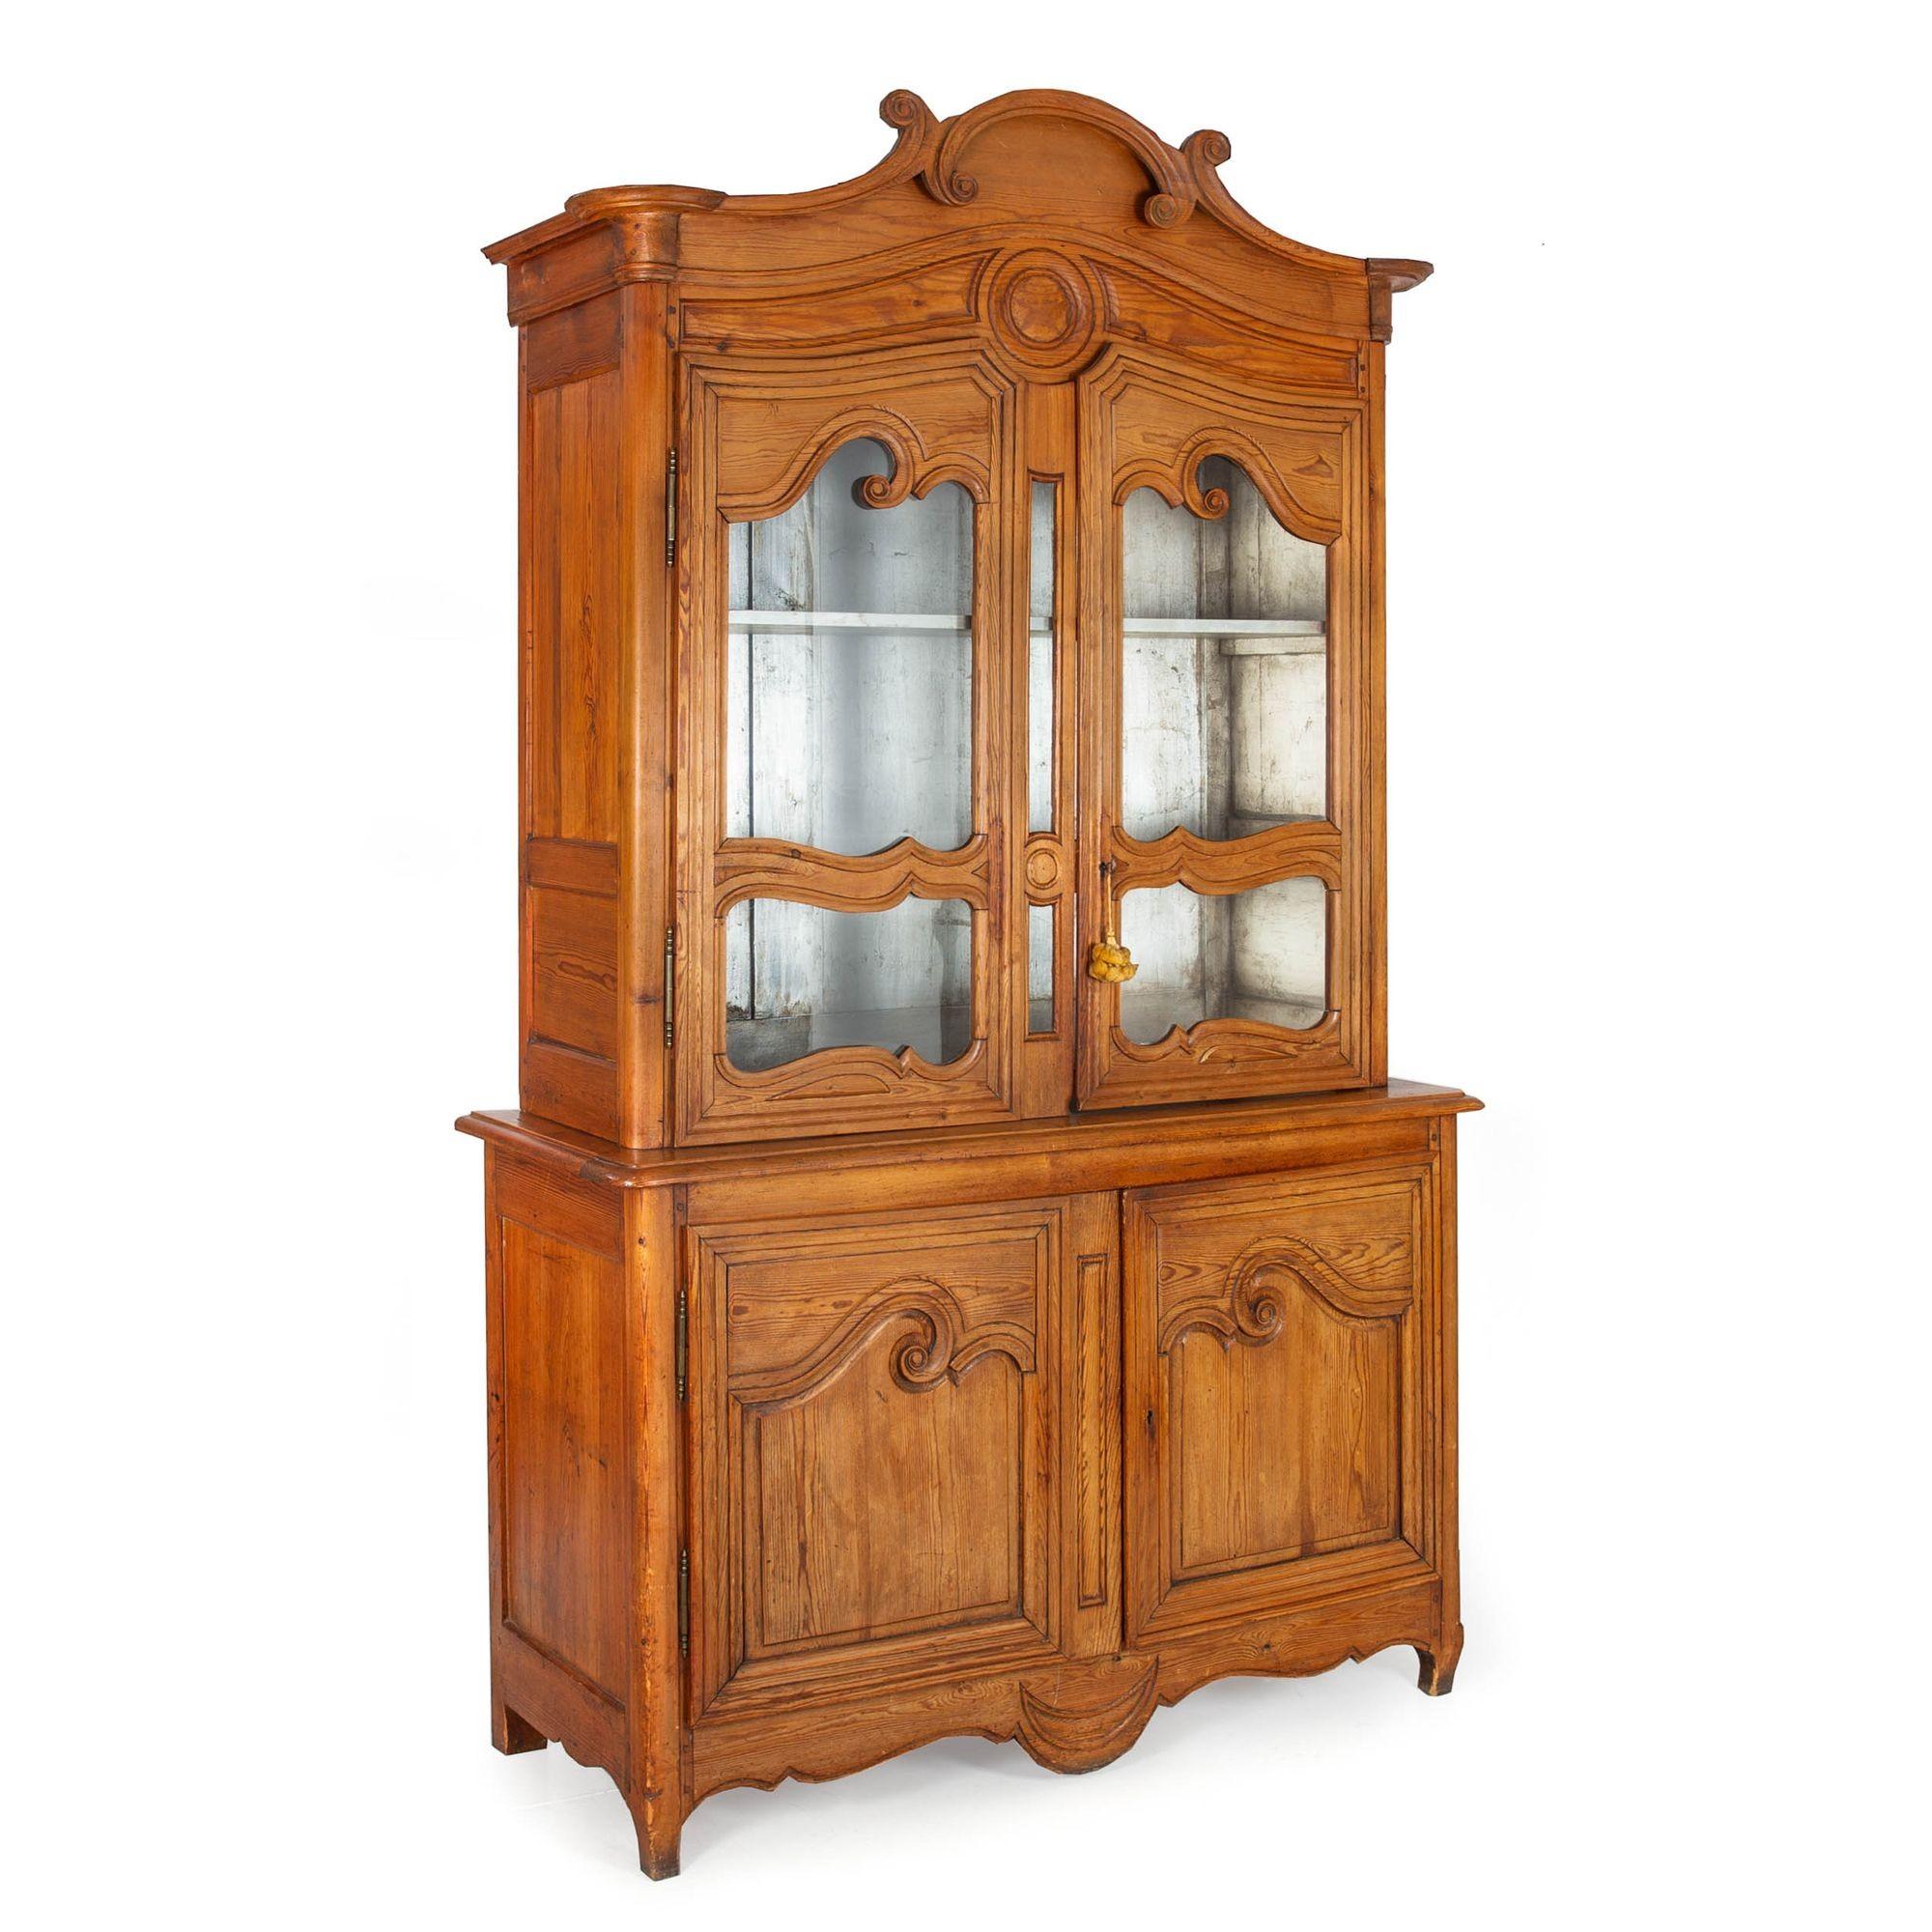 FRENCH WAXED PINE DISPLAY CABINET OR CUPBOARD
Circa mid-to-late 19th century
Item # 306REP14A 

A delightful French Provincial cabinet of the 19th century, it features a positively gorgeous scrubbed and waxed pine surface throughout that shows a